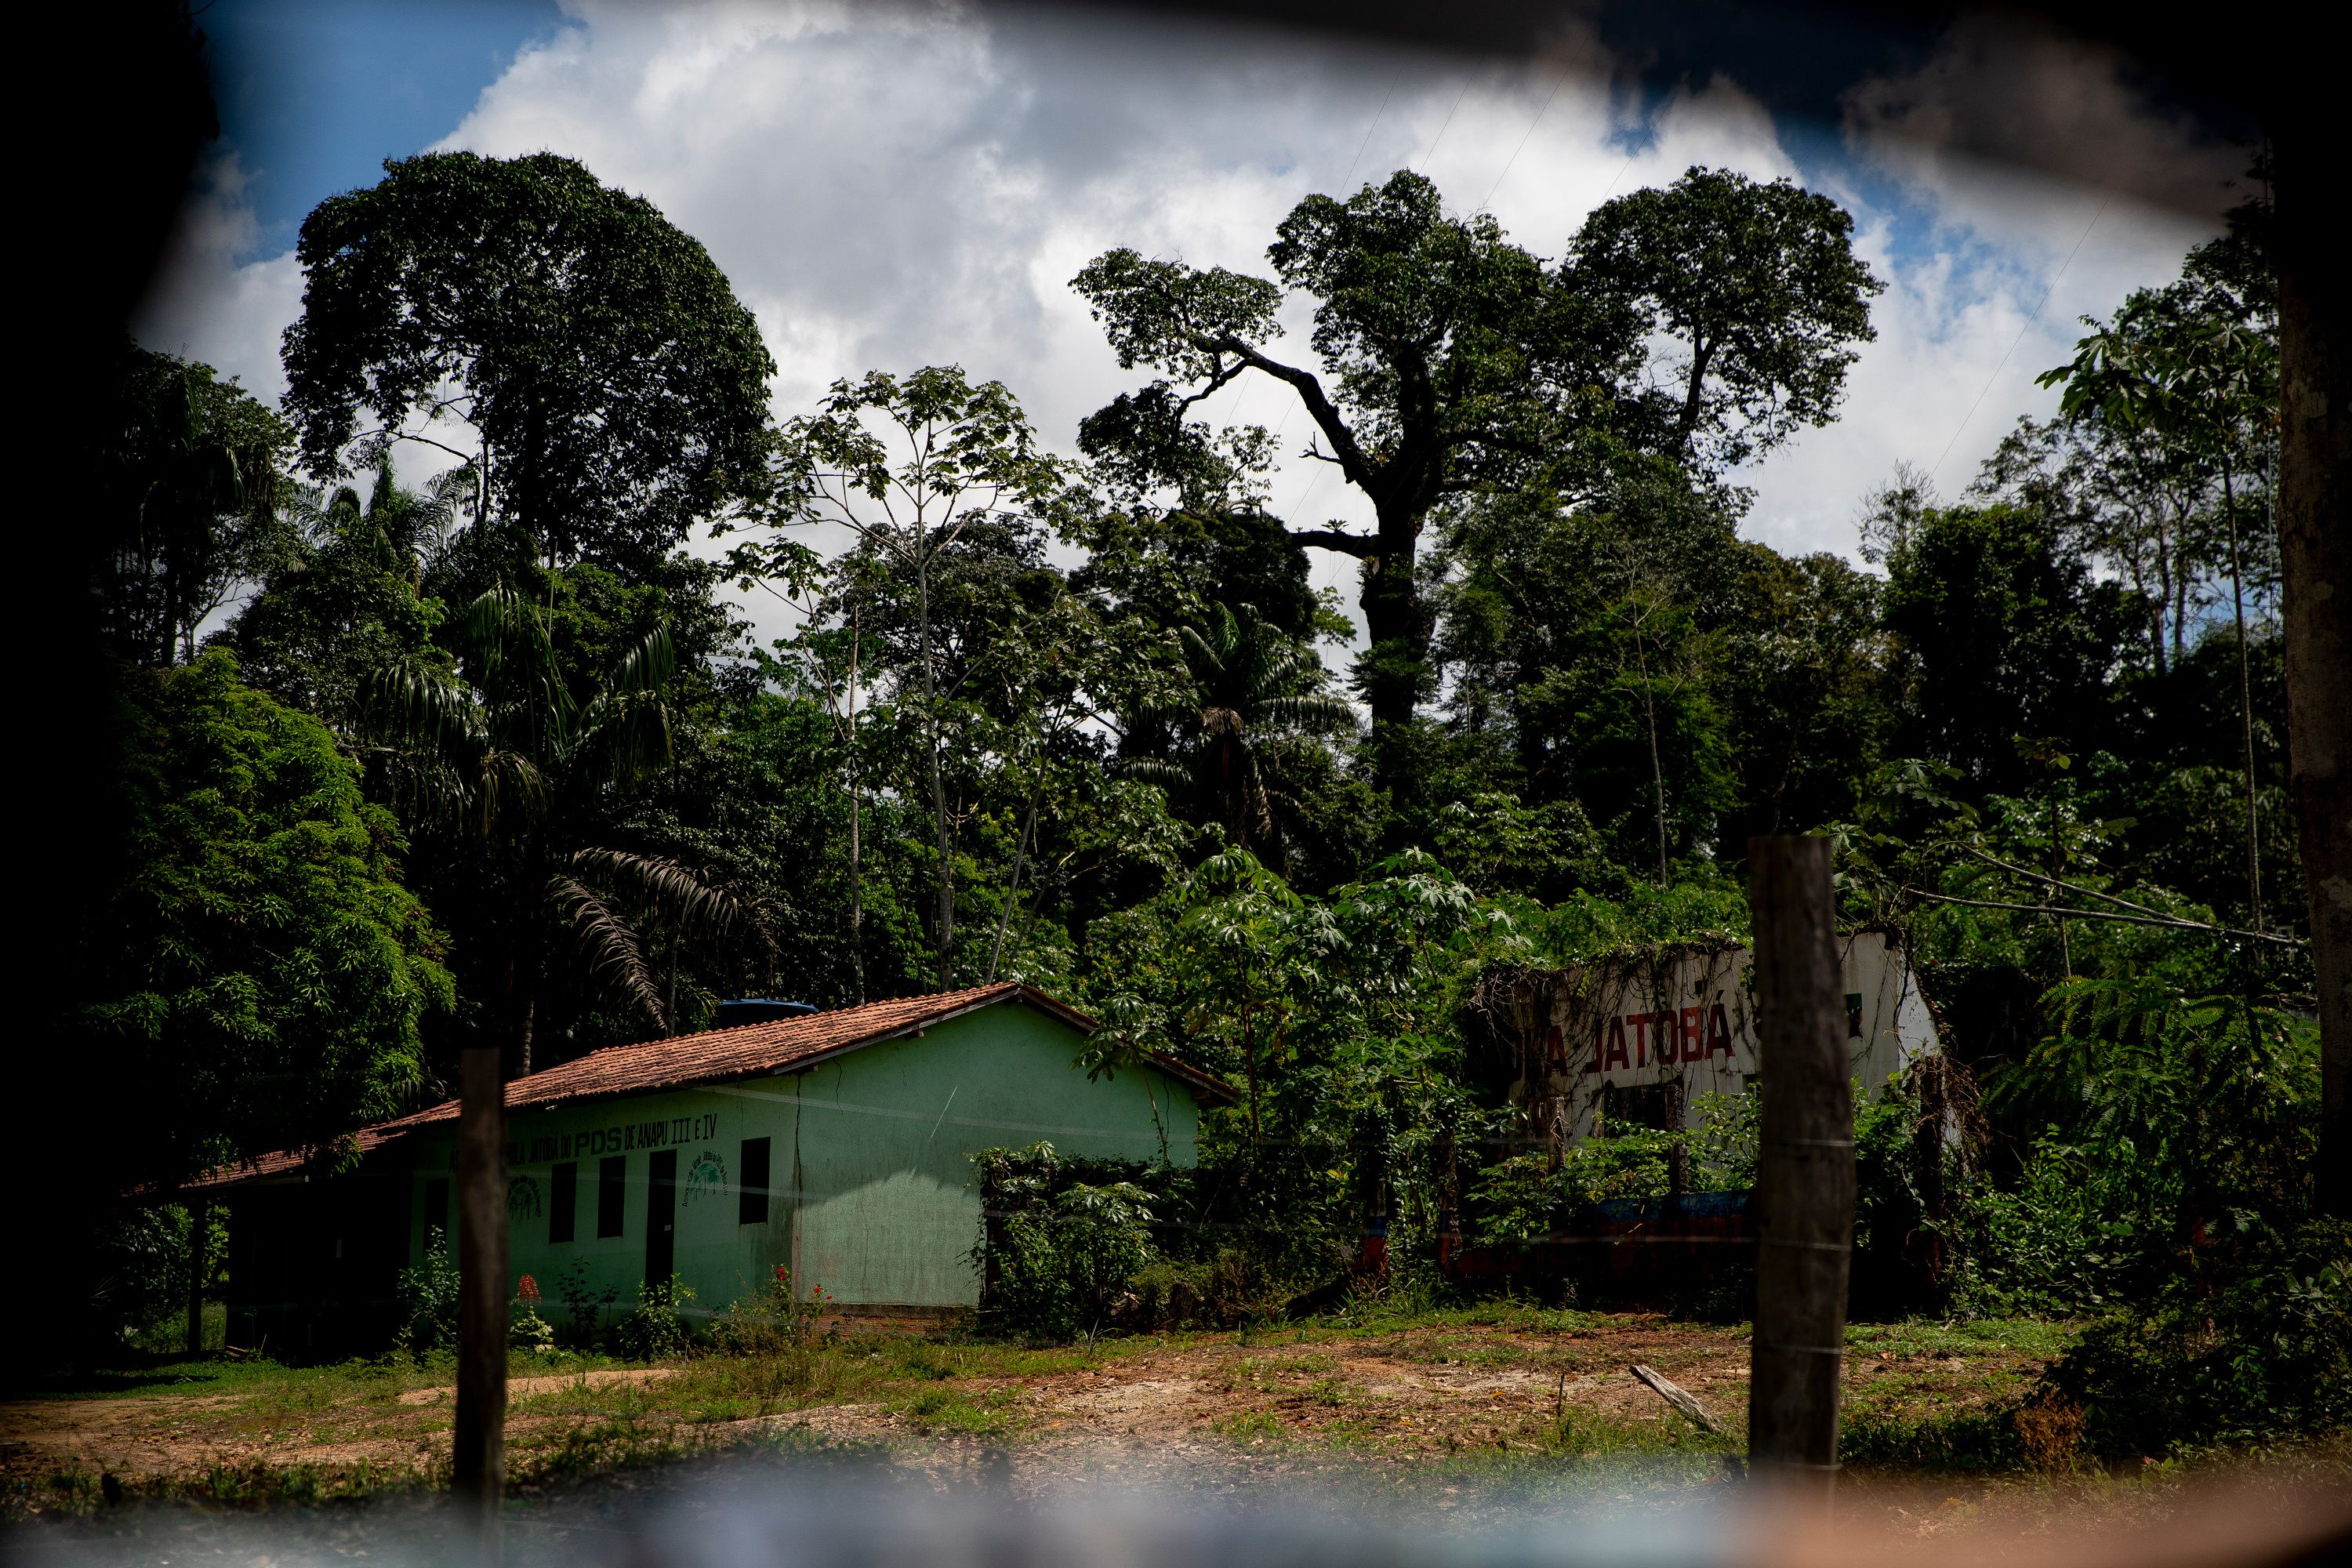 An abandoned property that is being used by so-called “invaders” into the Virola Jatoba settlement in Anapu. Image by Spenser Heaps. Brazil, 2019.